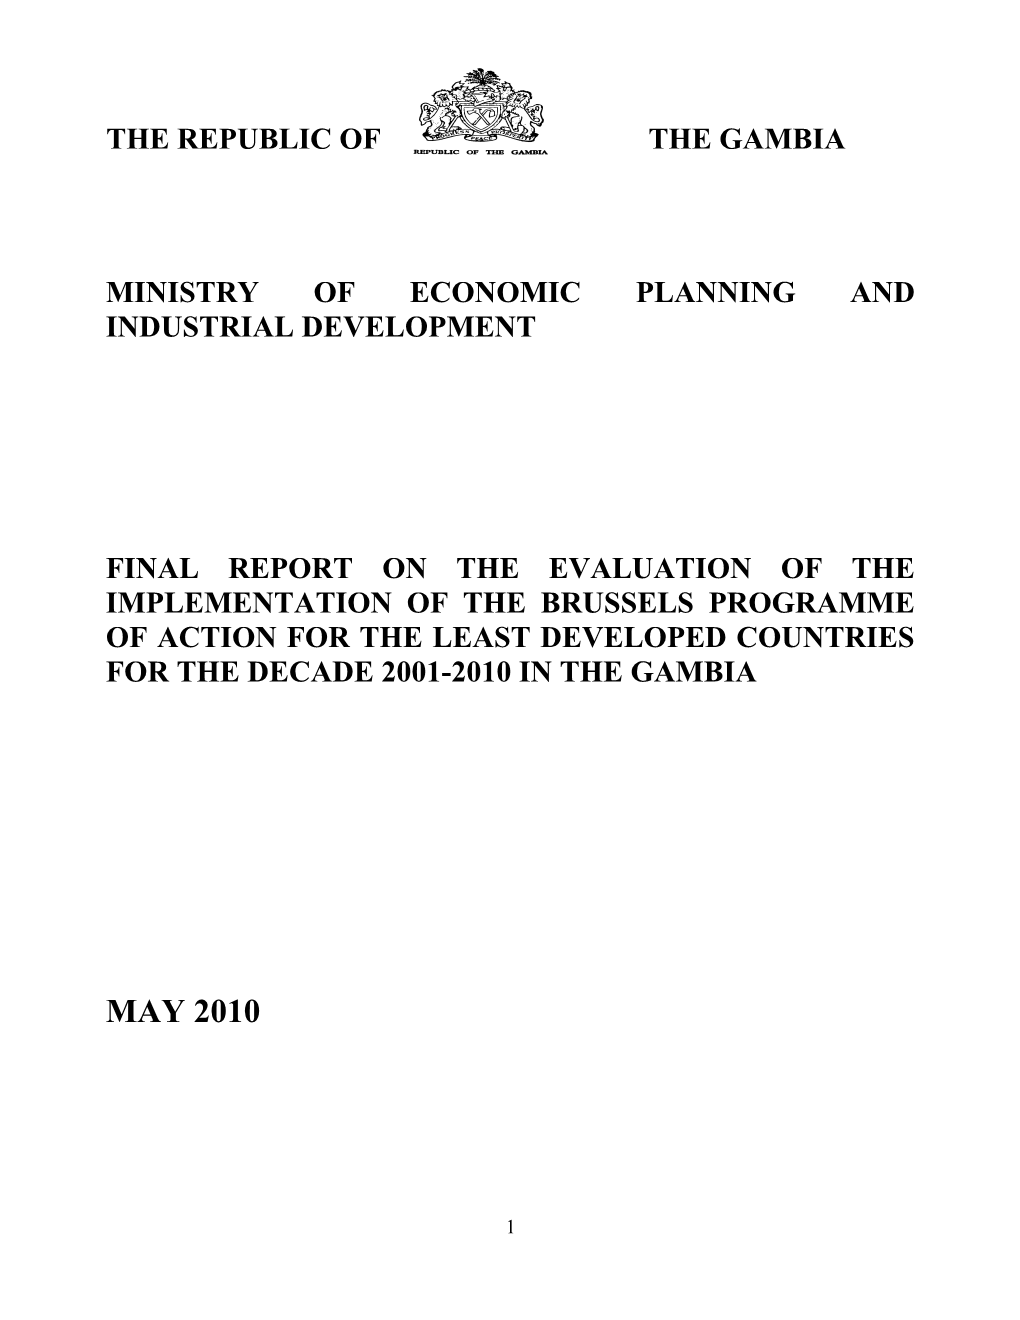 National Report on the Evaluation of the Brussels Action Plan for the Least Developed Countries